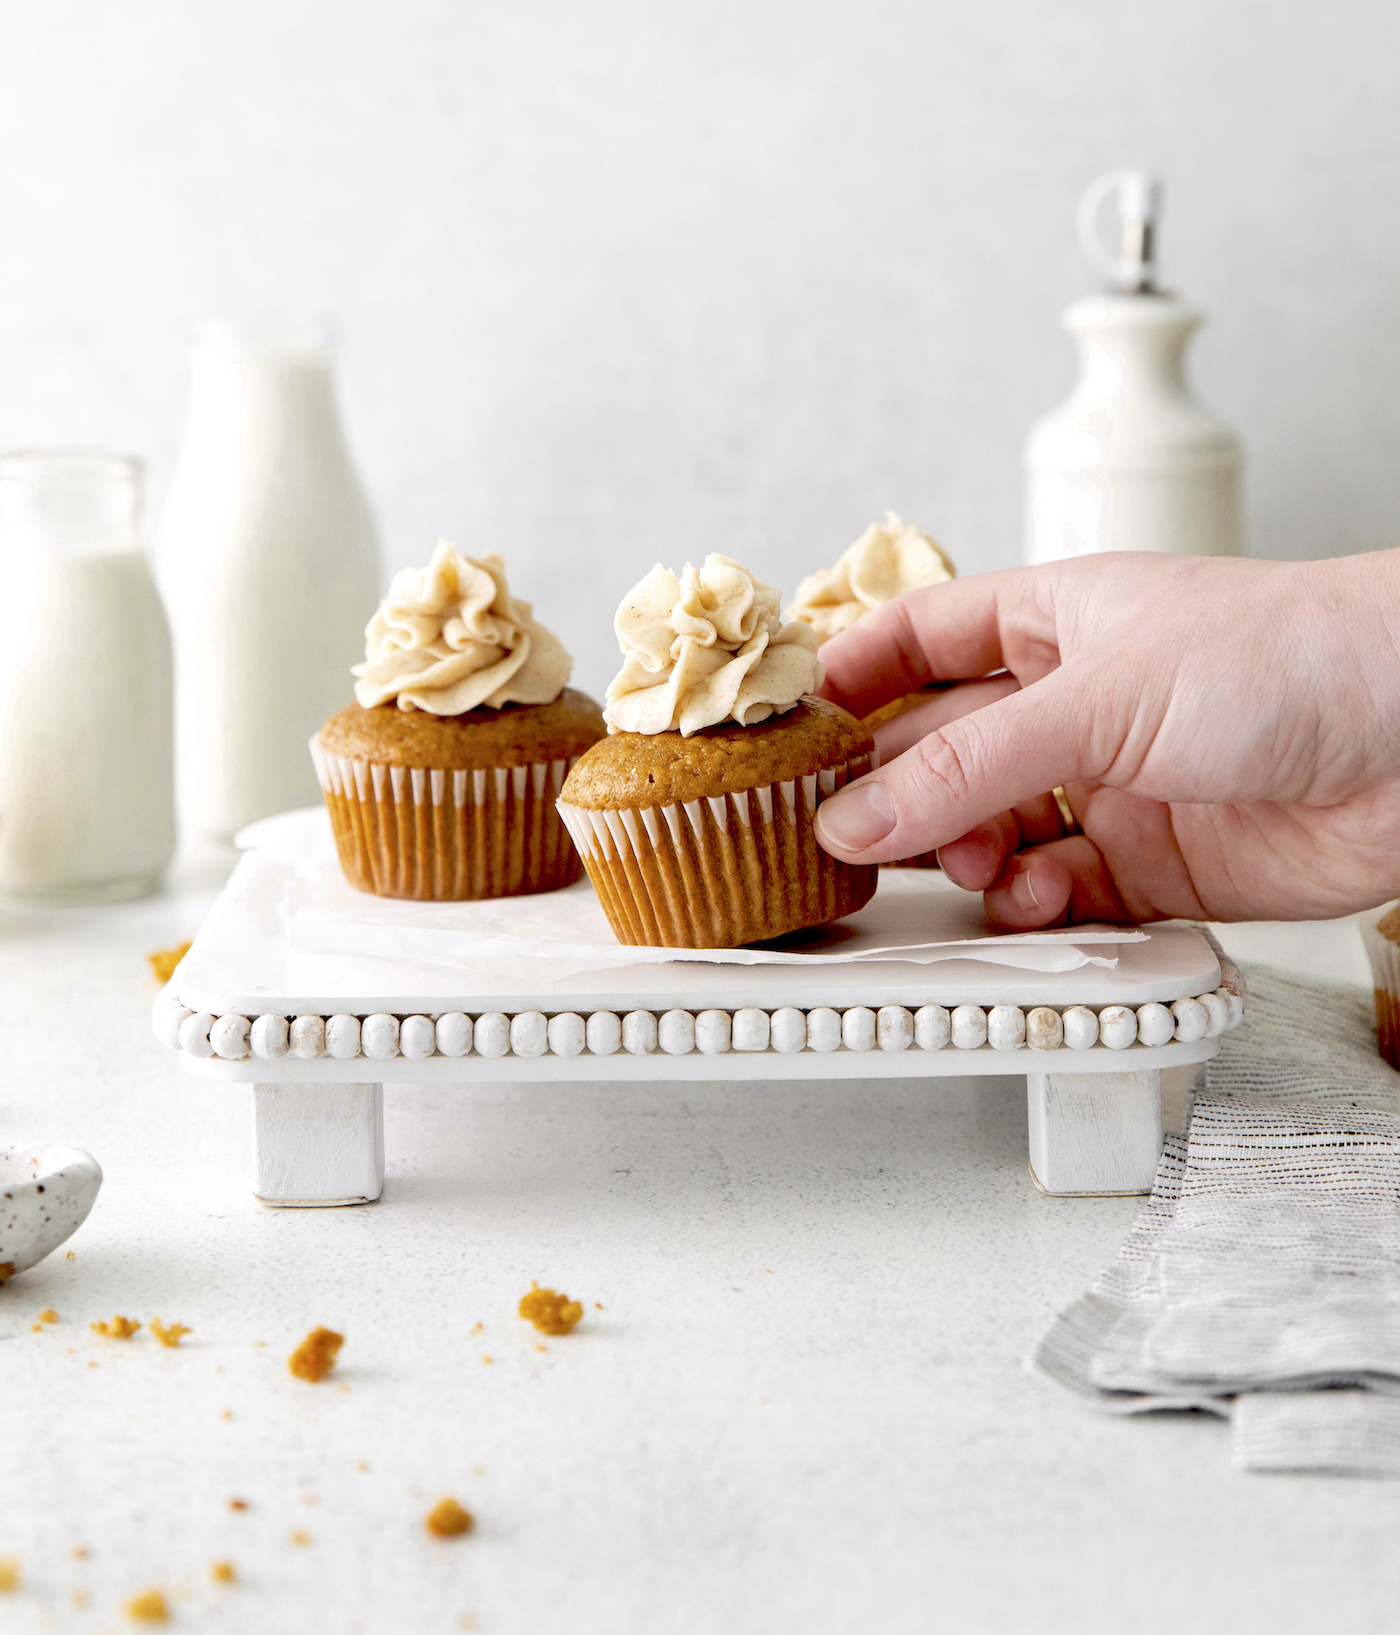 Gingerbread Cupcakes with Spiced White Chocolate Buttercream Frosting